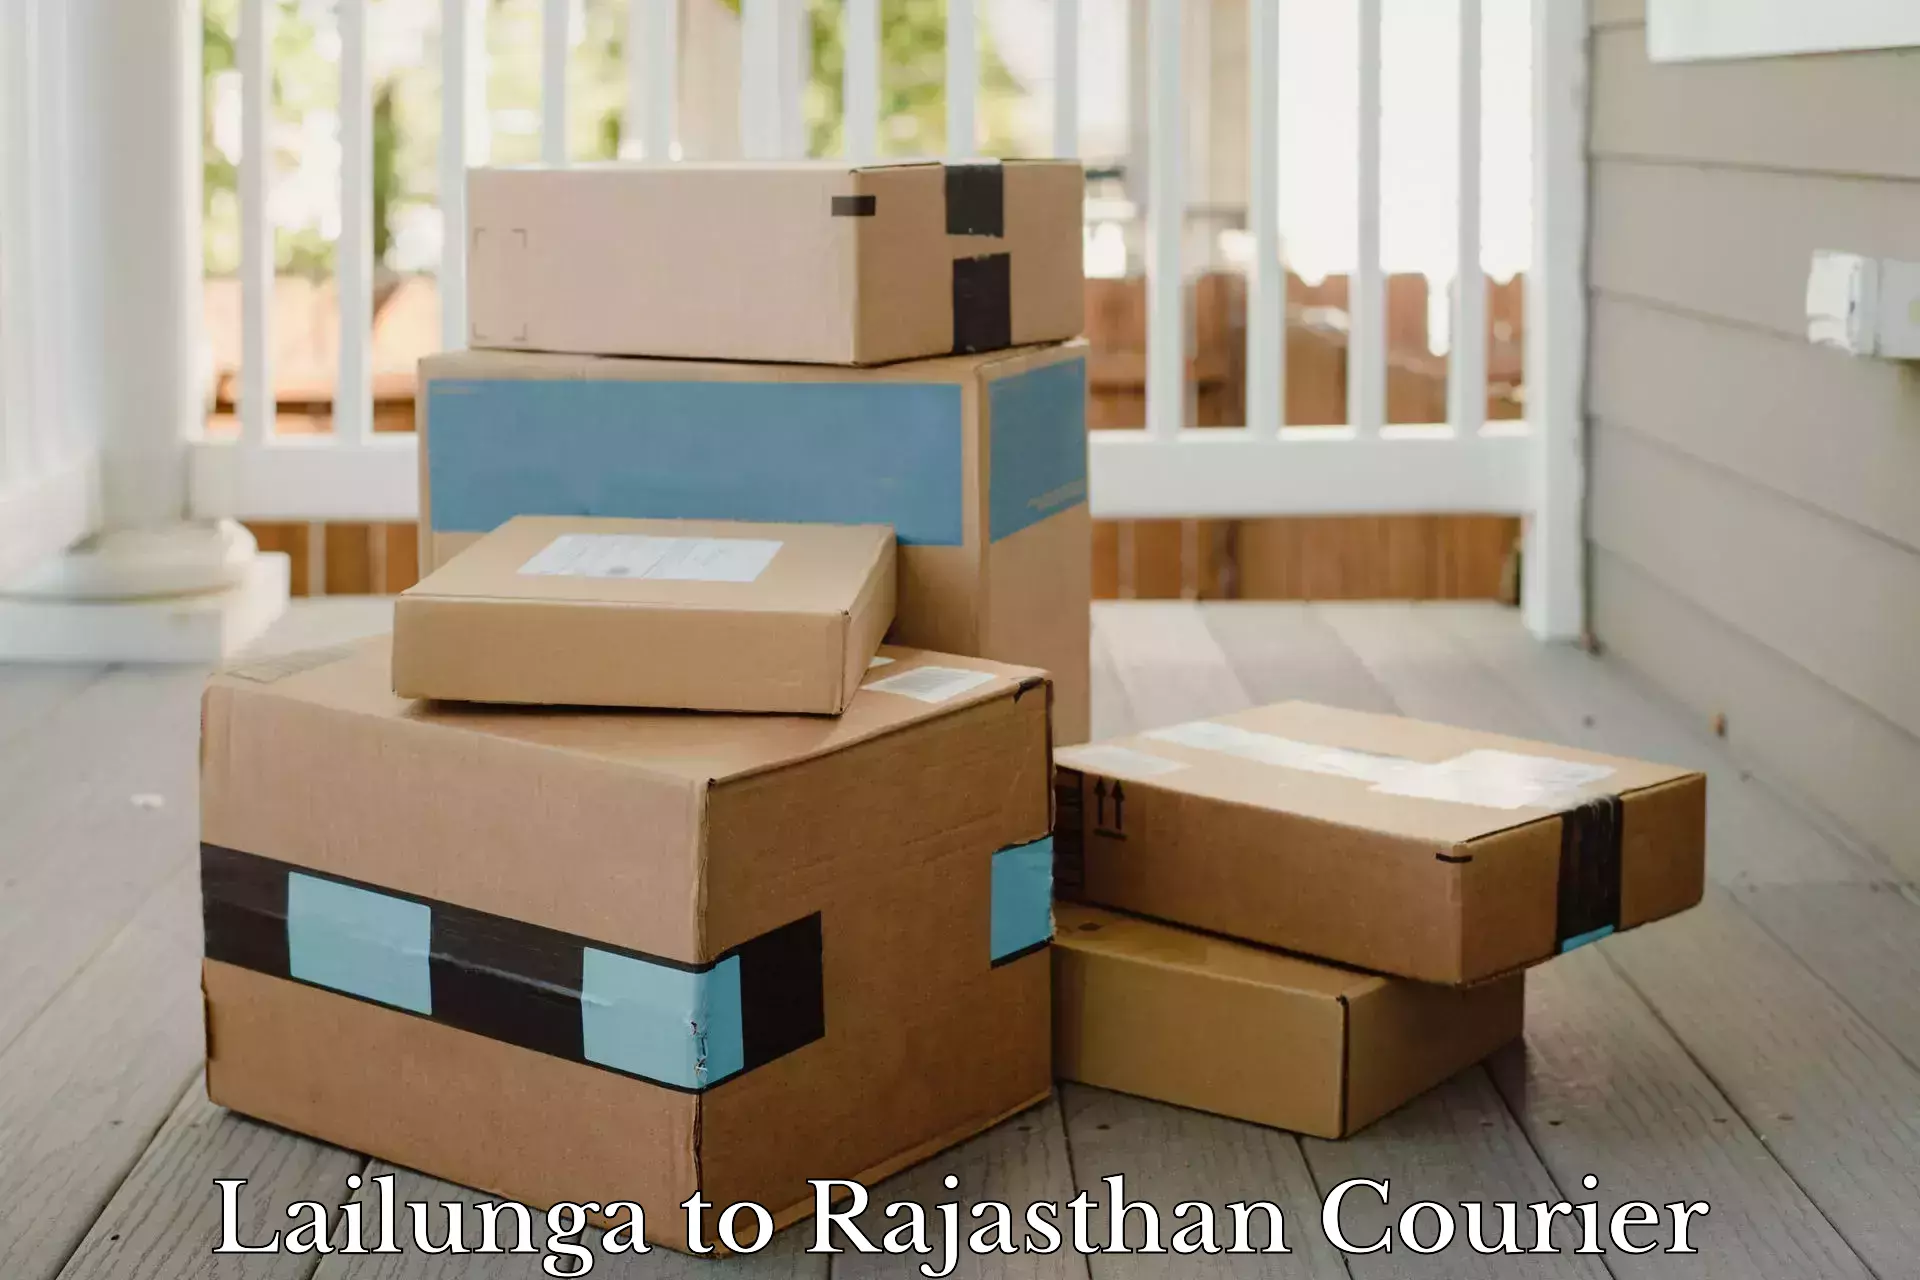 User-friendly delivery service Lailunga to Yeswanthapur